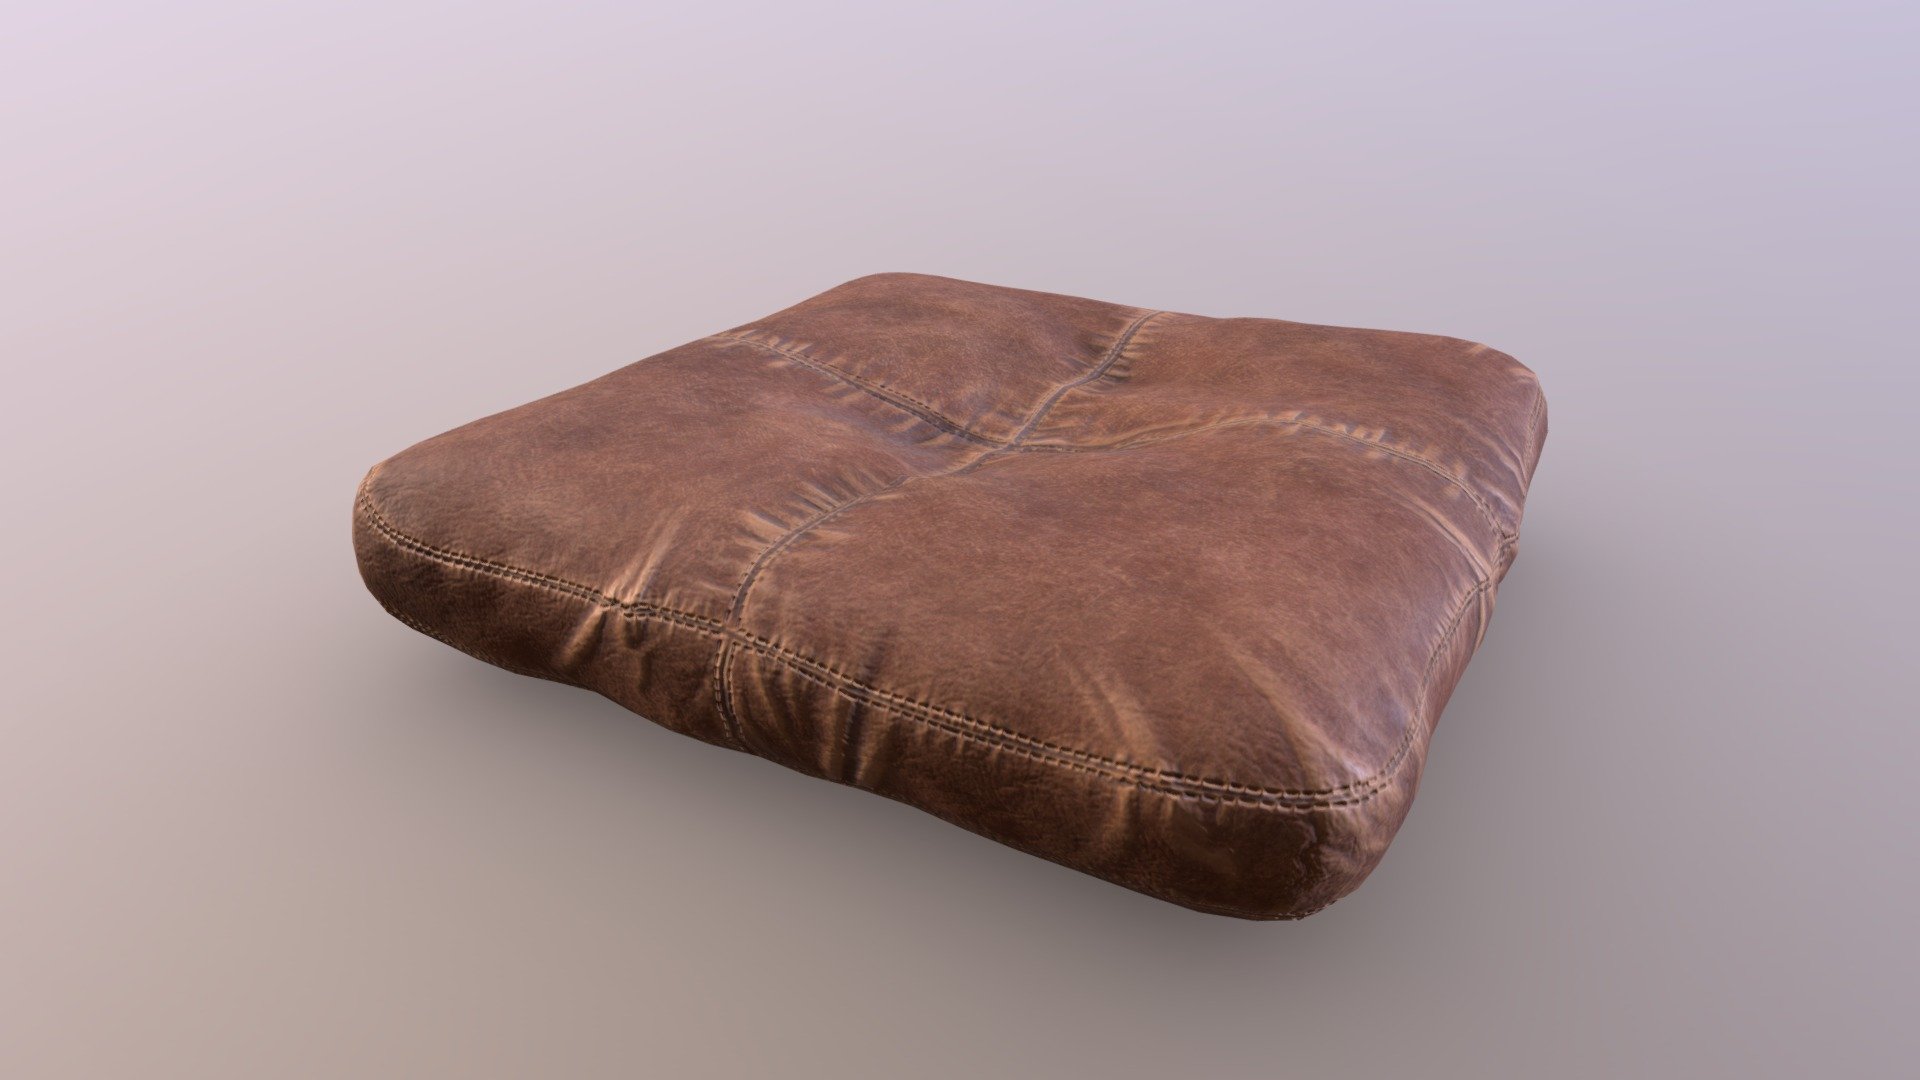 Just leather pillow:)
The low-poly model is suitable for use in game development and AR/VR purposes - Leather Pillow - Buy Royalty Free 3D model by ulenspy 3d model